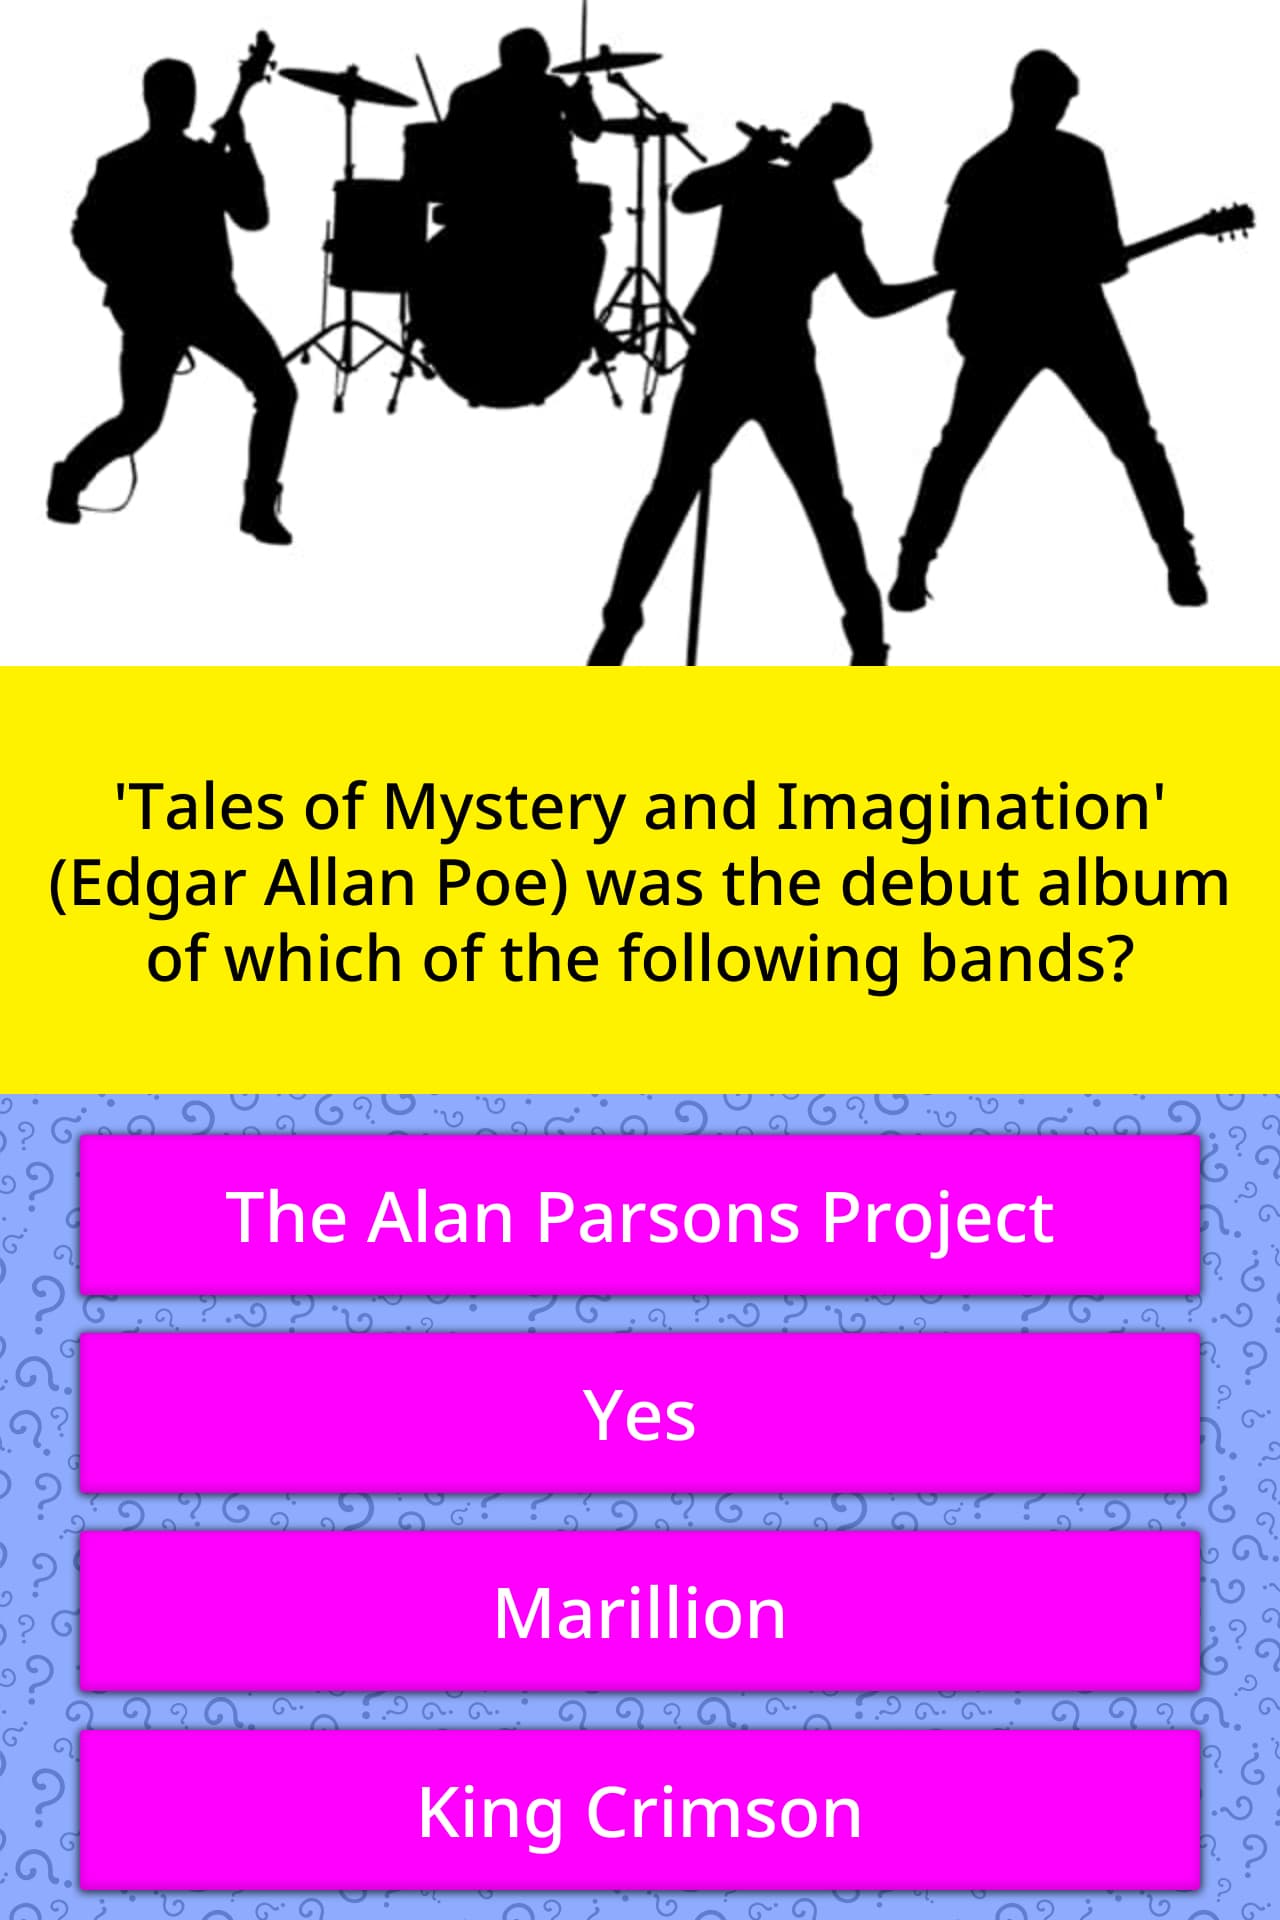 tales of mystery and imagination by edgar allan poe